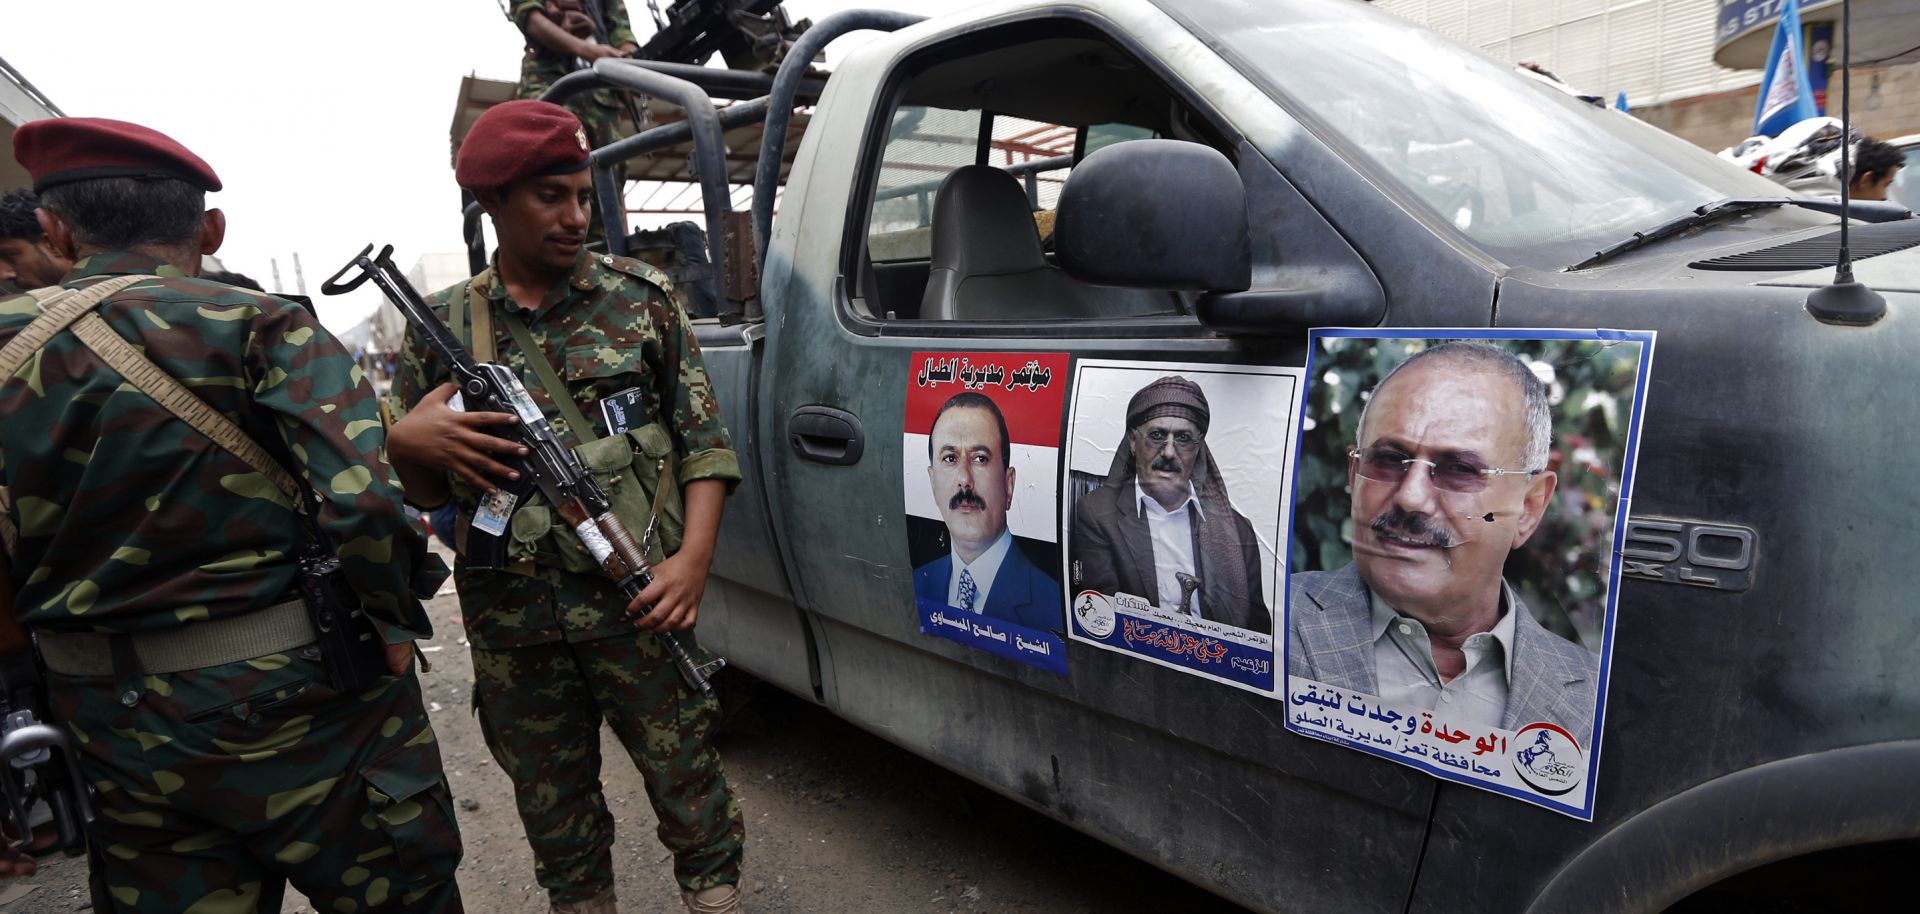 Forces loyal to Yemen's former President Ali Abdullah Saleh (shown on poster) stand guard on Aug. 24 in Sabaeen Square in the capital, Sanaa. 